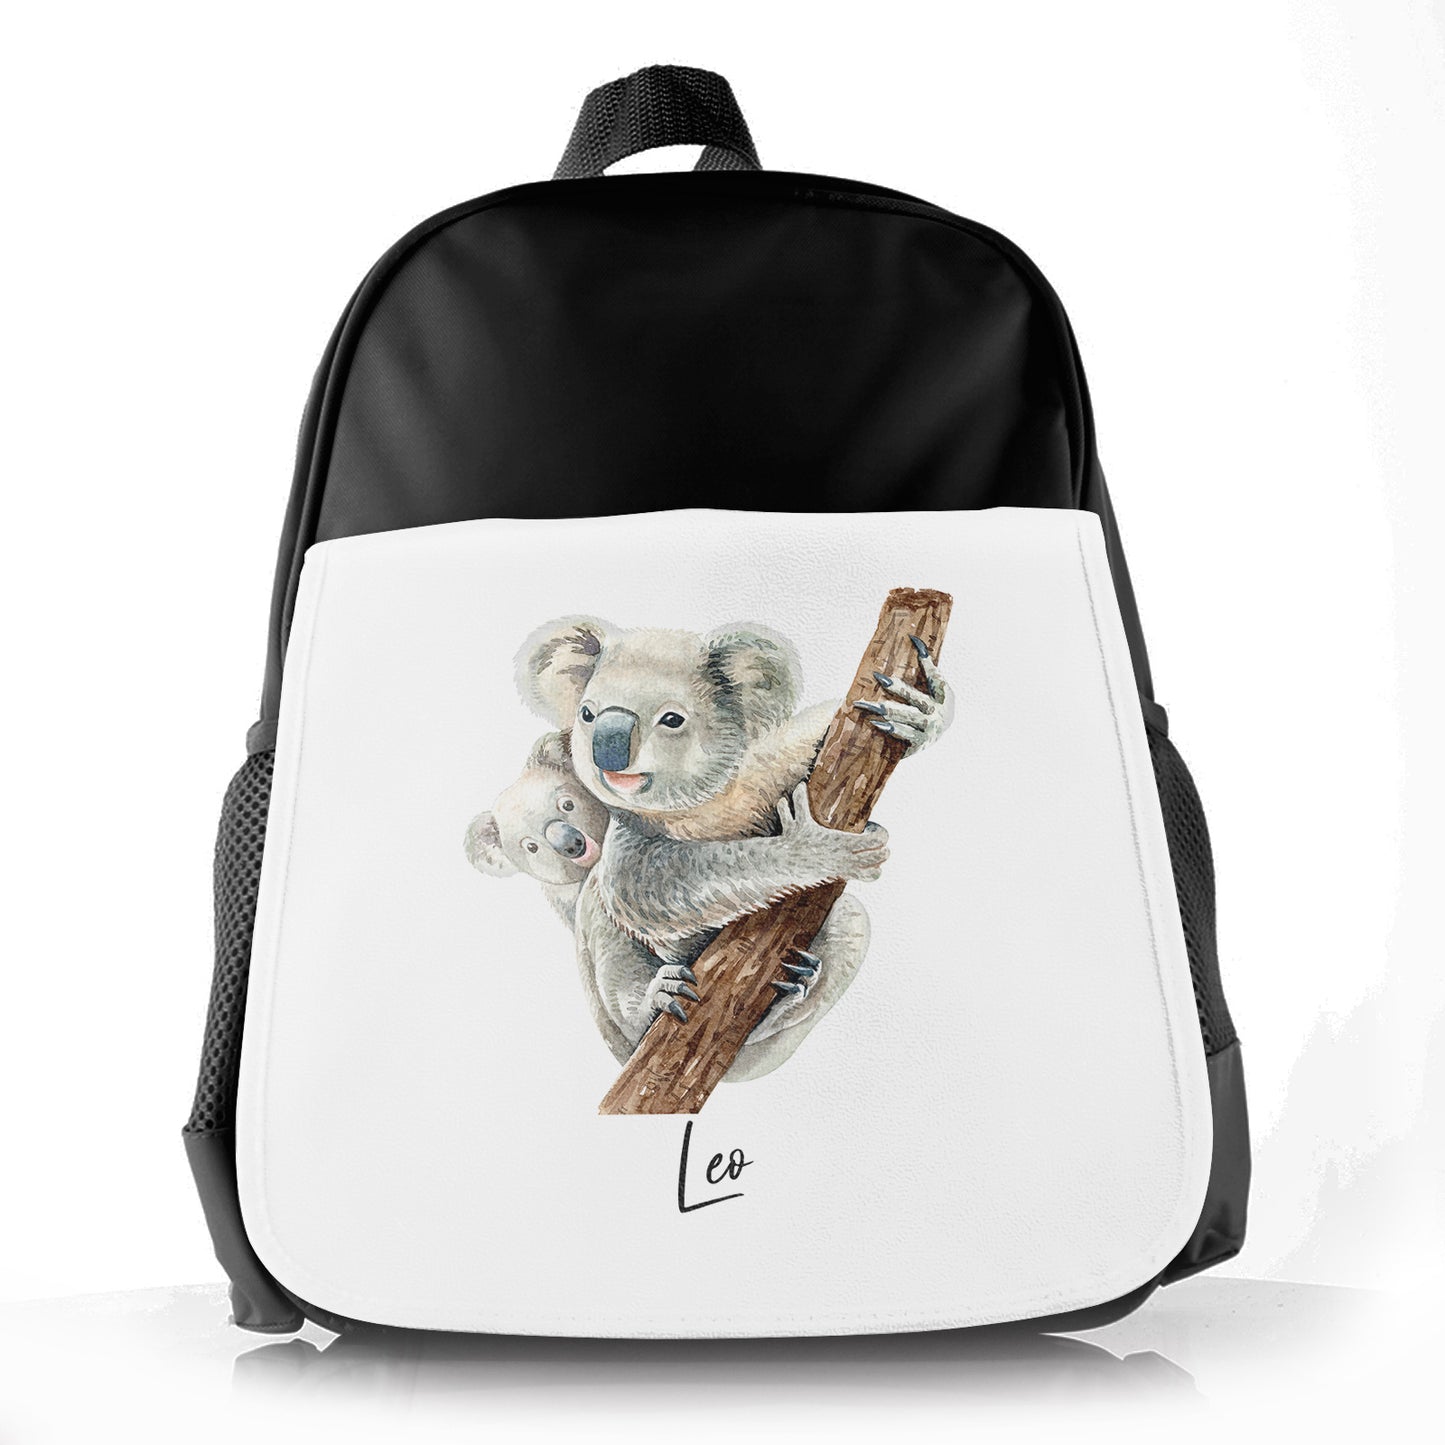 Personalised School Bag with Welcoming Text and Climbing Mum and Baby Koalas